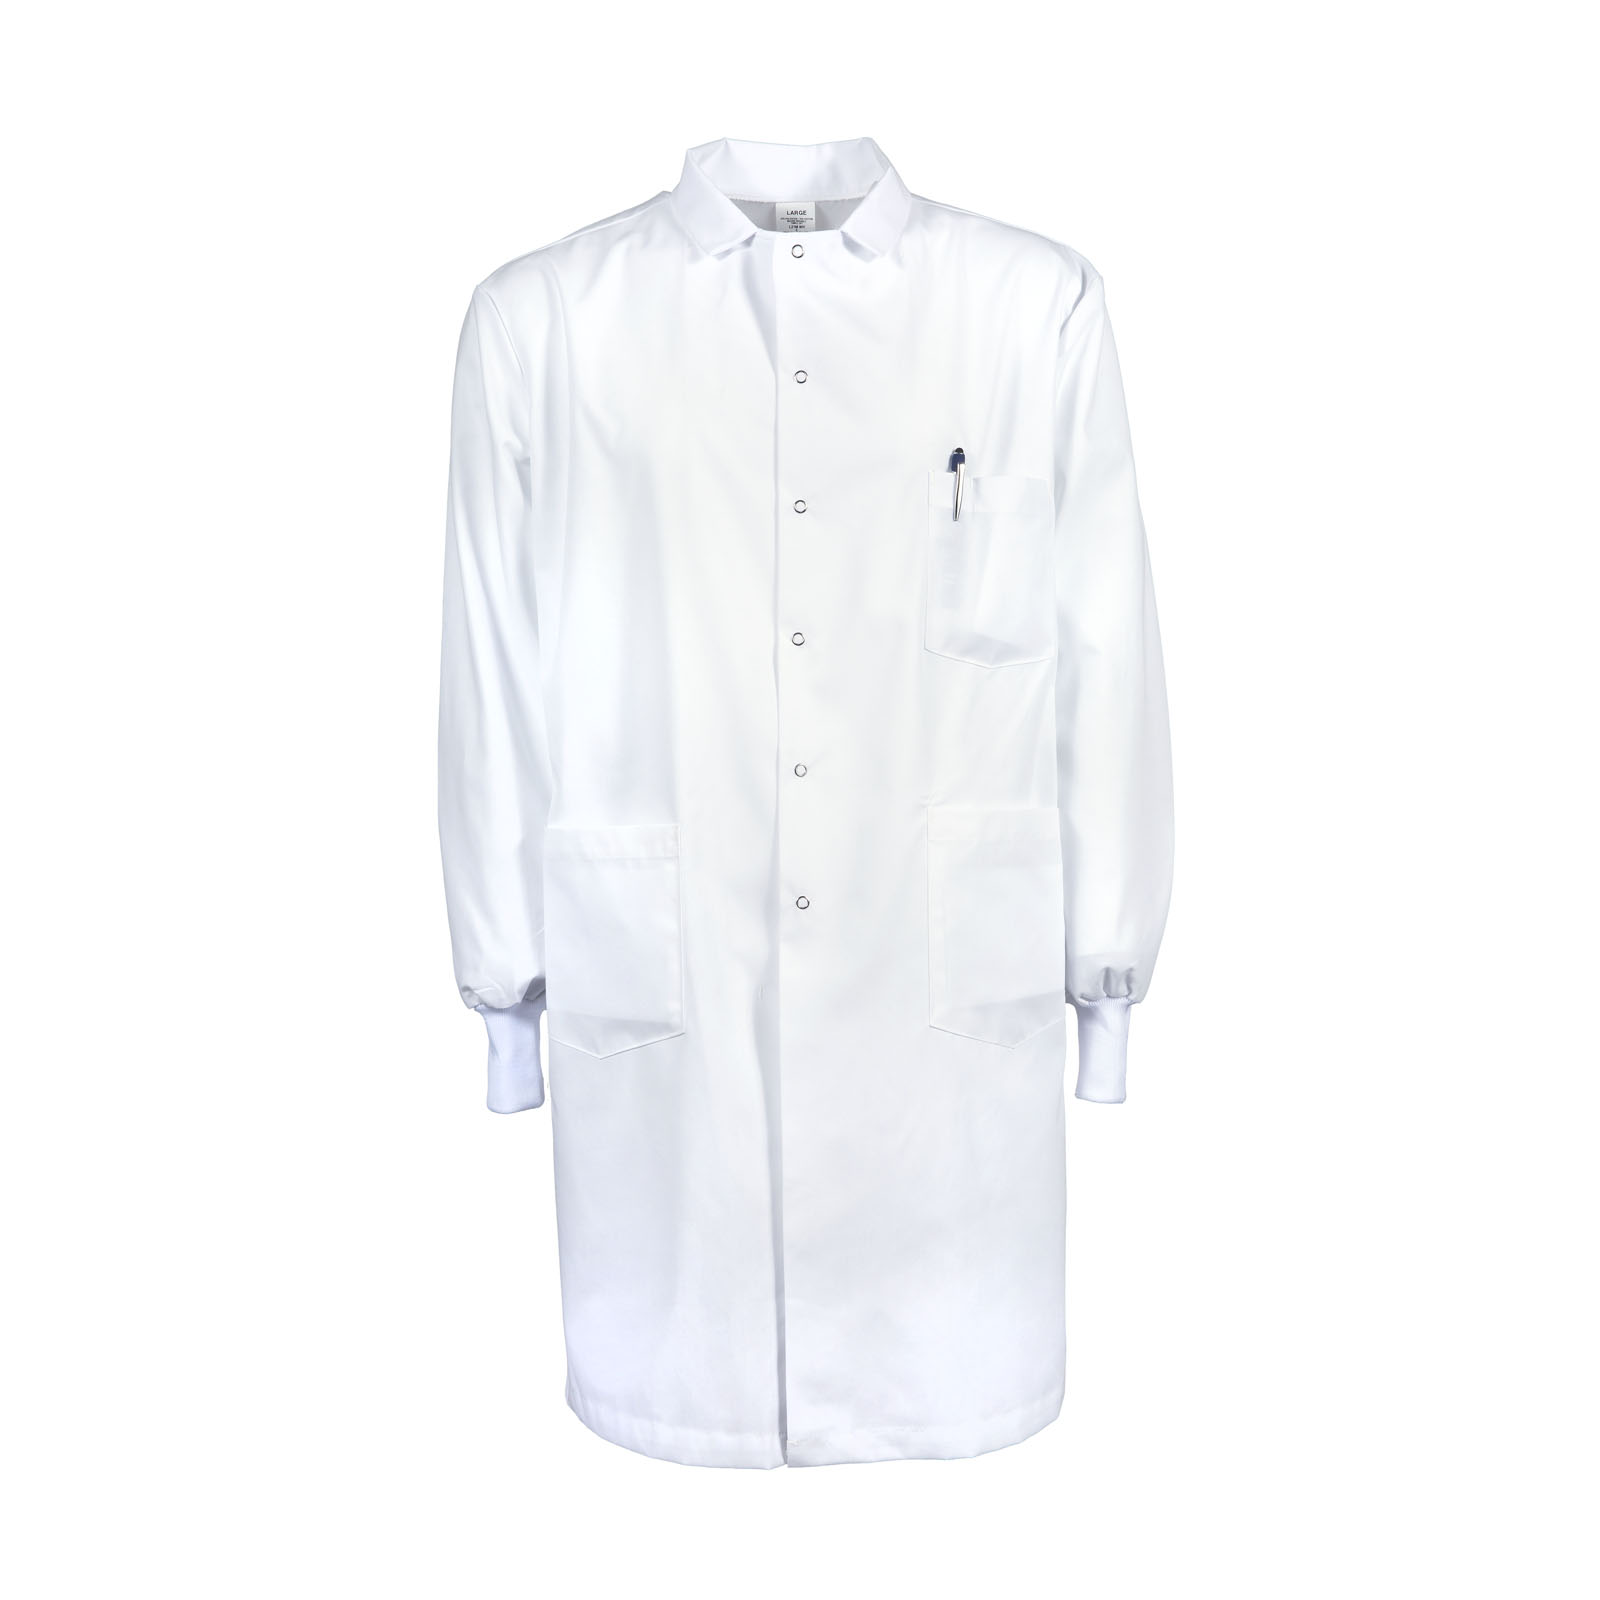 L21M Pinnacle Textile Men's Lab Coat with snap closure and knit wrist cuffs